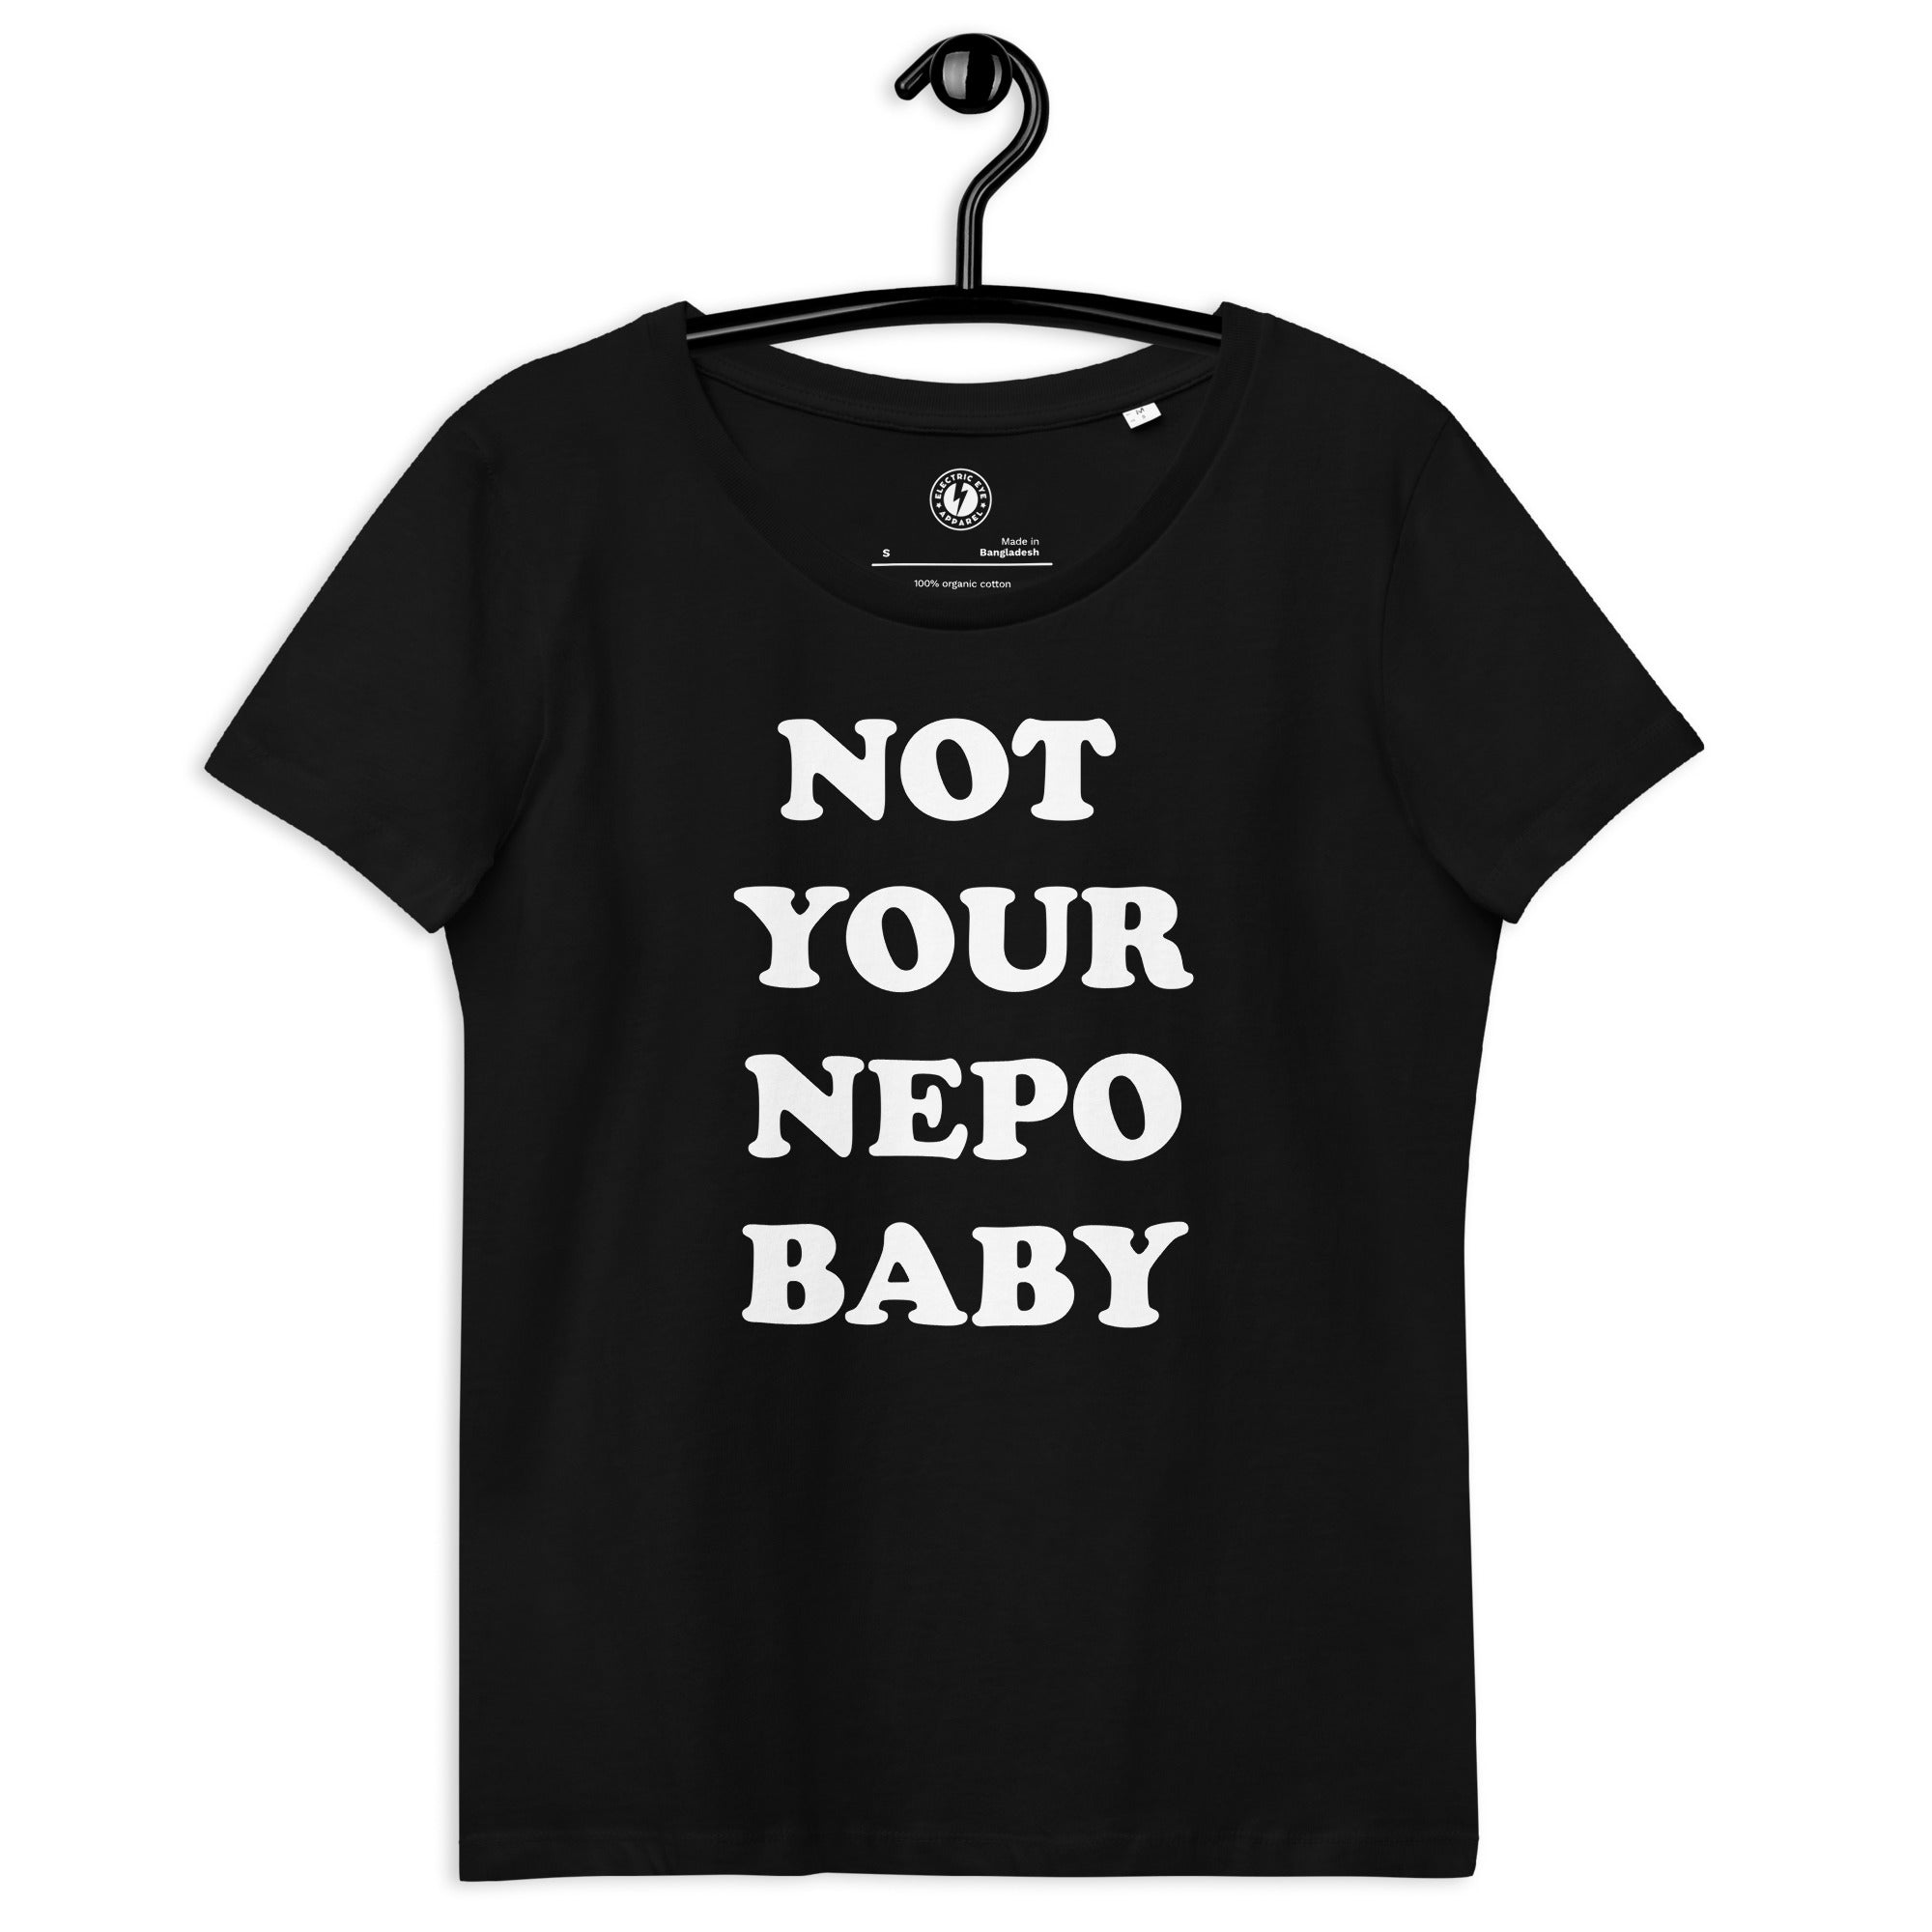 Not Your Nepo Baby Printed Women's Fitted Organic T-shirt